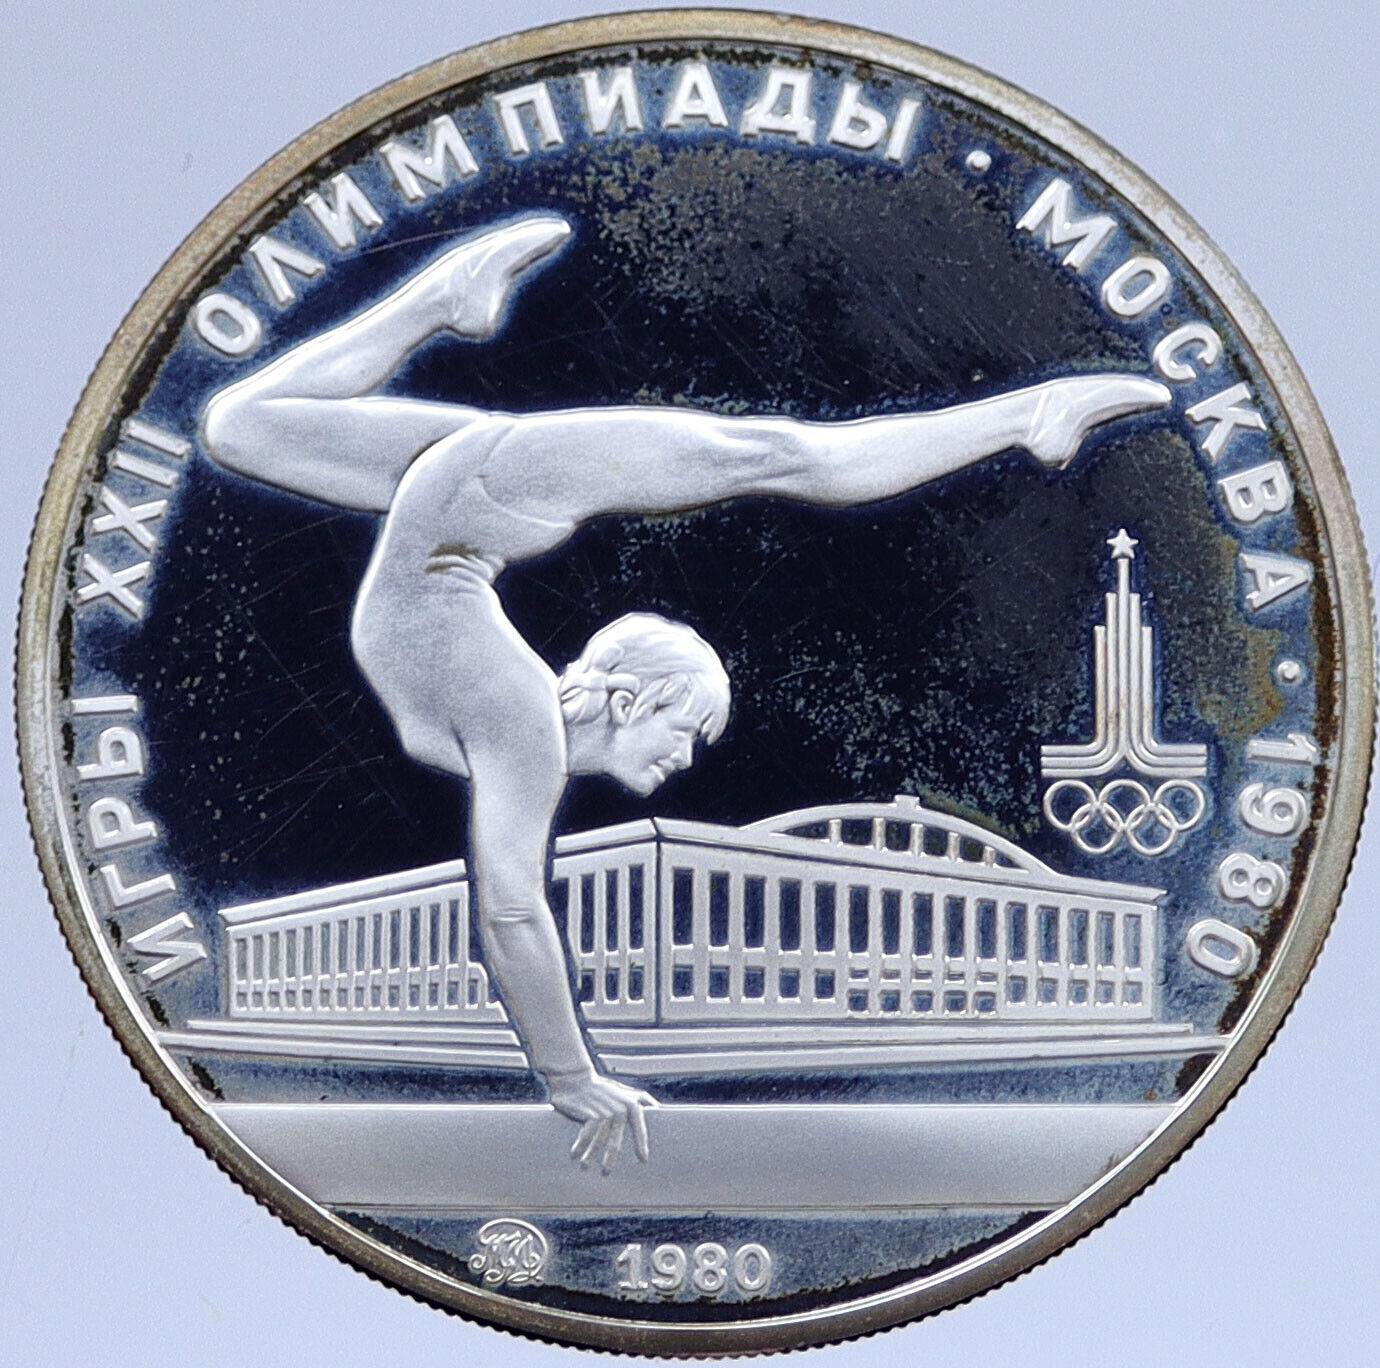 1980 MOSCOW Russia Olympics VINTAGE GYMNASTICS Proof Silver 5 Ruble Coin i118949